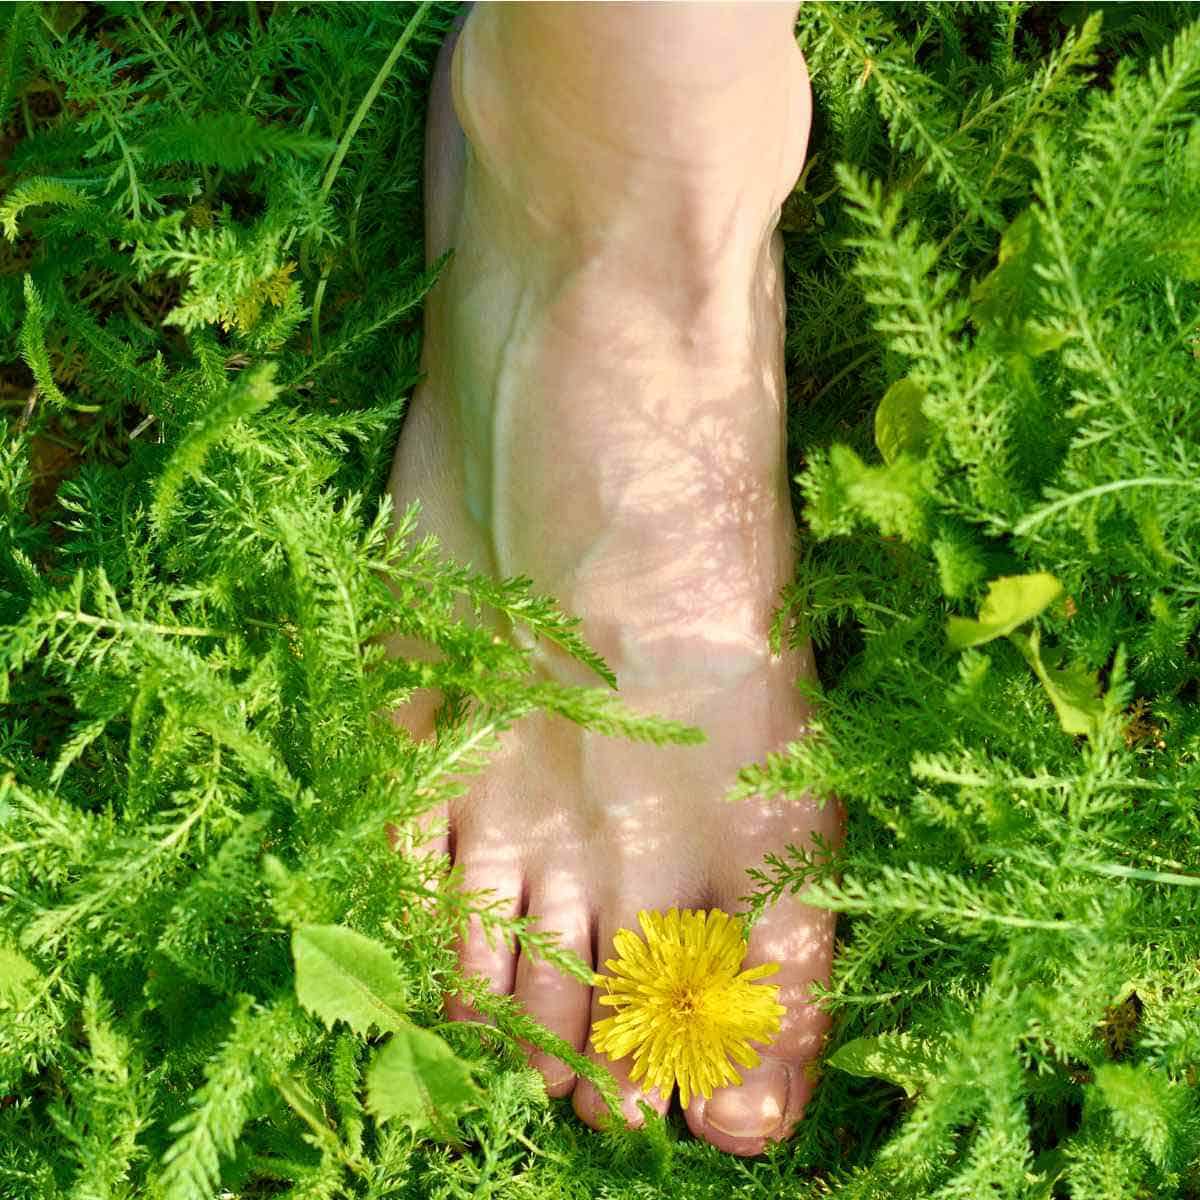 A woman's foot in the grass with dancelions.